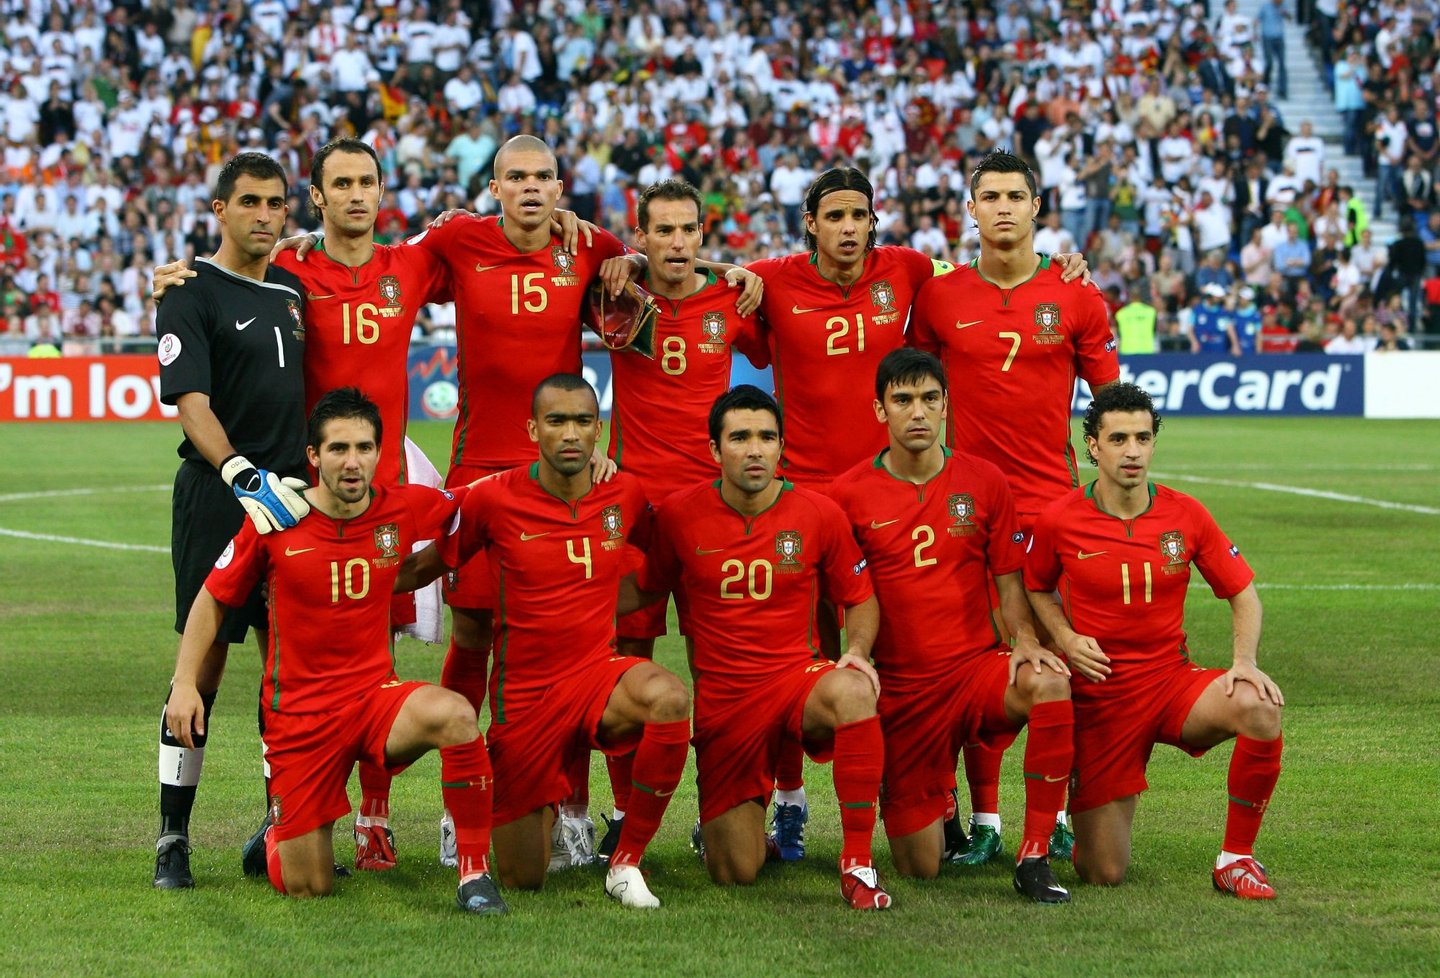 BASEL, SWITZERLAND - JUNE 19: The Portugal team pose during the UEFA EURO 2008 Quarter Final match between Portugal and Germany at St. Jakob-Park on June 19, 2008 in Basel, Switzerland. (Photo by Alex Livesey/Getty Images)